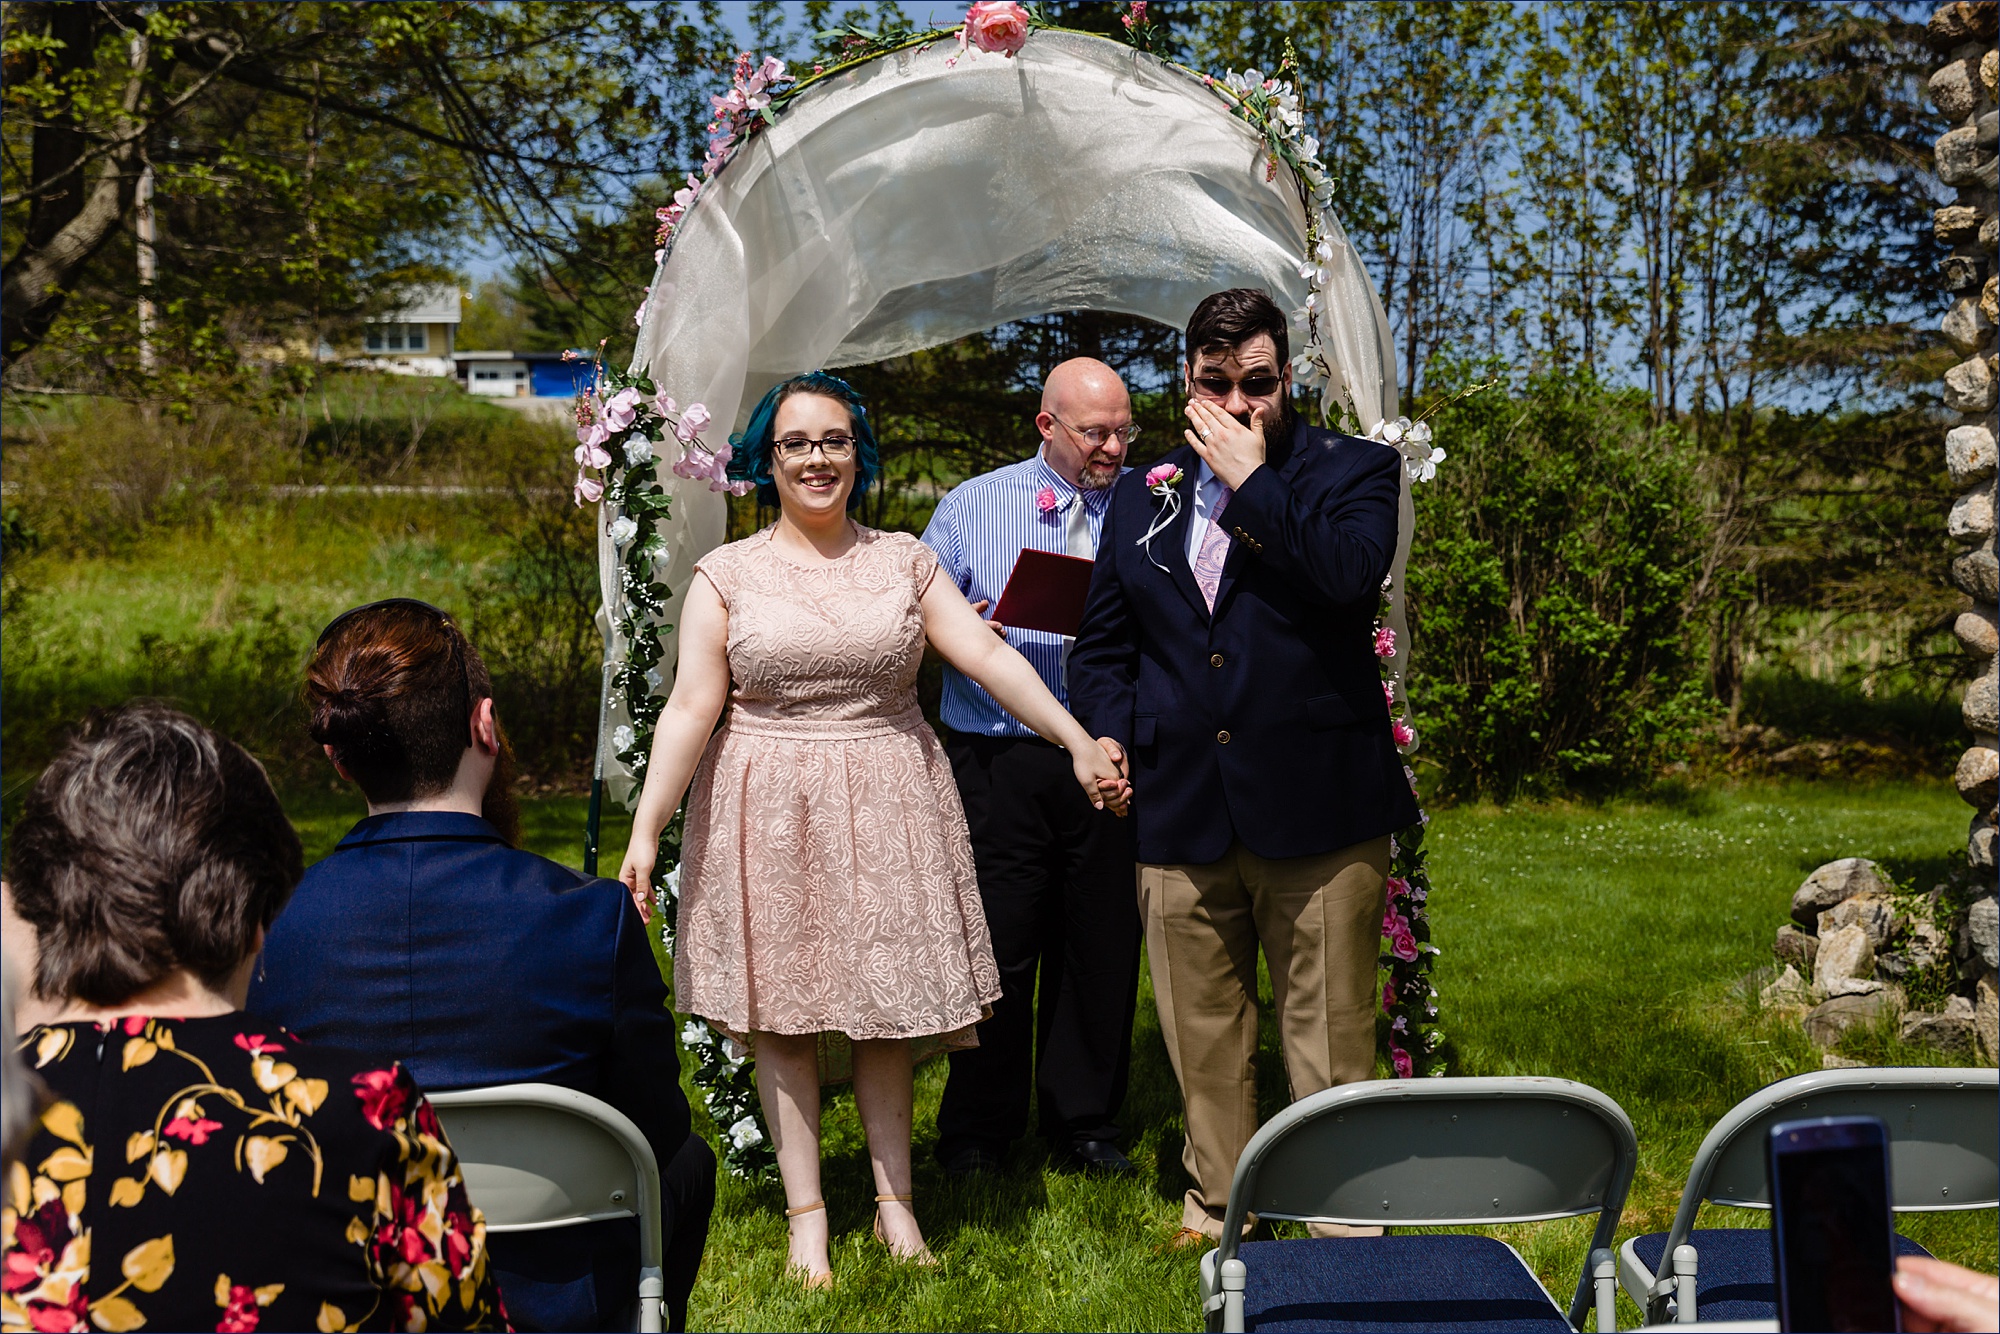 The groom wipes a tear after officially marrying his bride in the intimate Maine backyard wedding